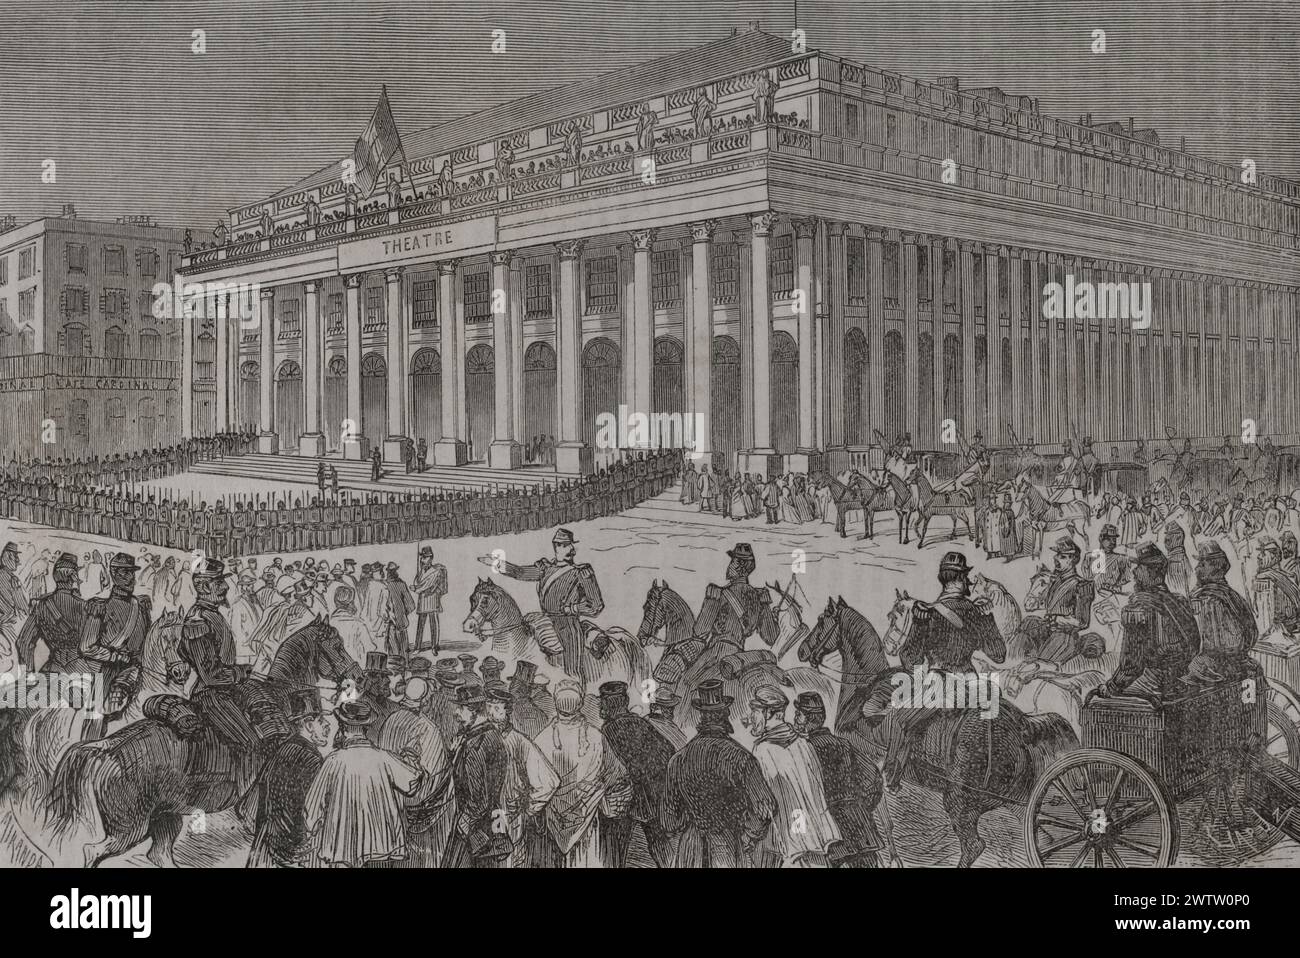 Franco-Prussian War (1870-1871). During the war, the city of Bordeaux temporarily (from 8 February to 20 March 1871) became the seat of the French government. Exterior view of the Grand Théâtre where the National Assembly of the French Parliament met, 13 February 1871. Drawing by Miranda. Engraving by Capuz. 'Historia de la Guerra de Francia y Prusia' (History of the War between France and Prussia). Volume II. Published in Barcelona, 1871. Author: Fernando Miranda. 19th-century Spanish draughtsman. Tomás Carlos Capuz (1834-1899). Spanish engraver. Stock Photo